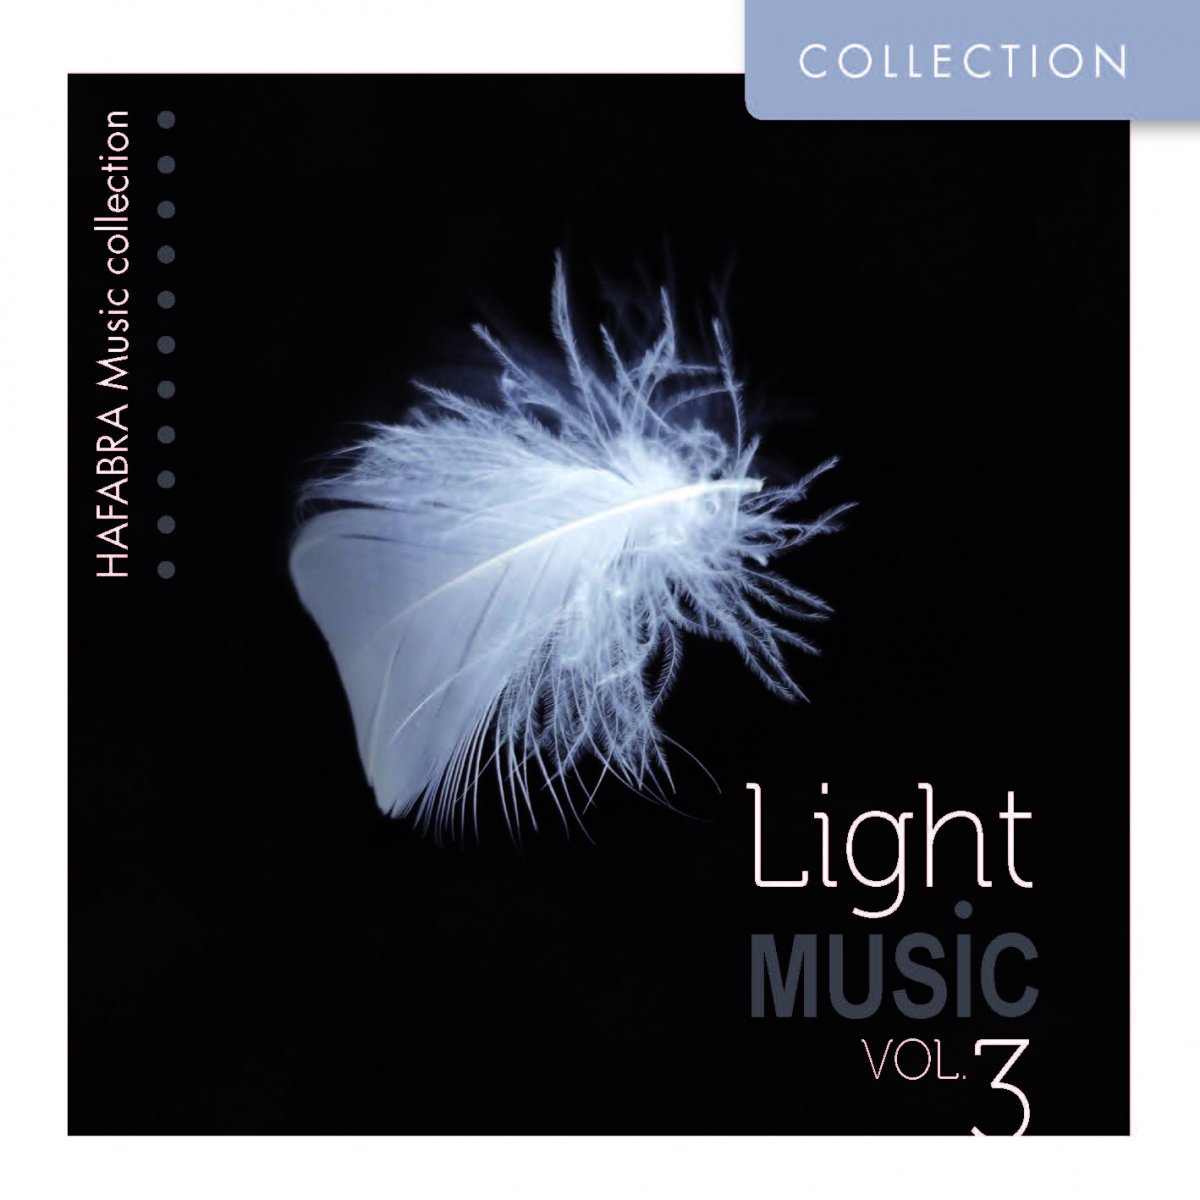 Hafabra Music Collection: Light Music #3 - cliquer ici